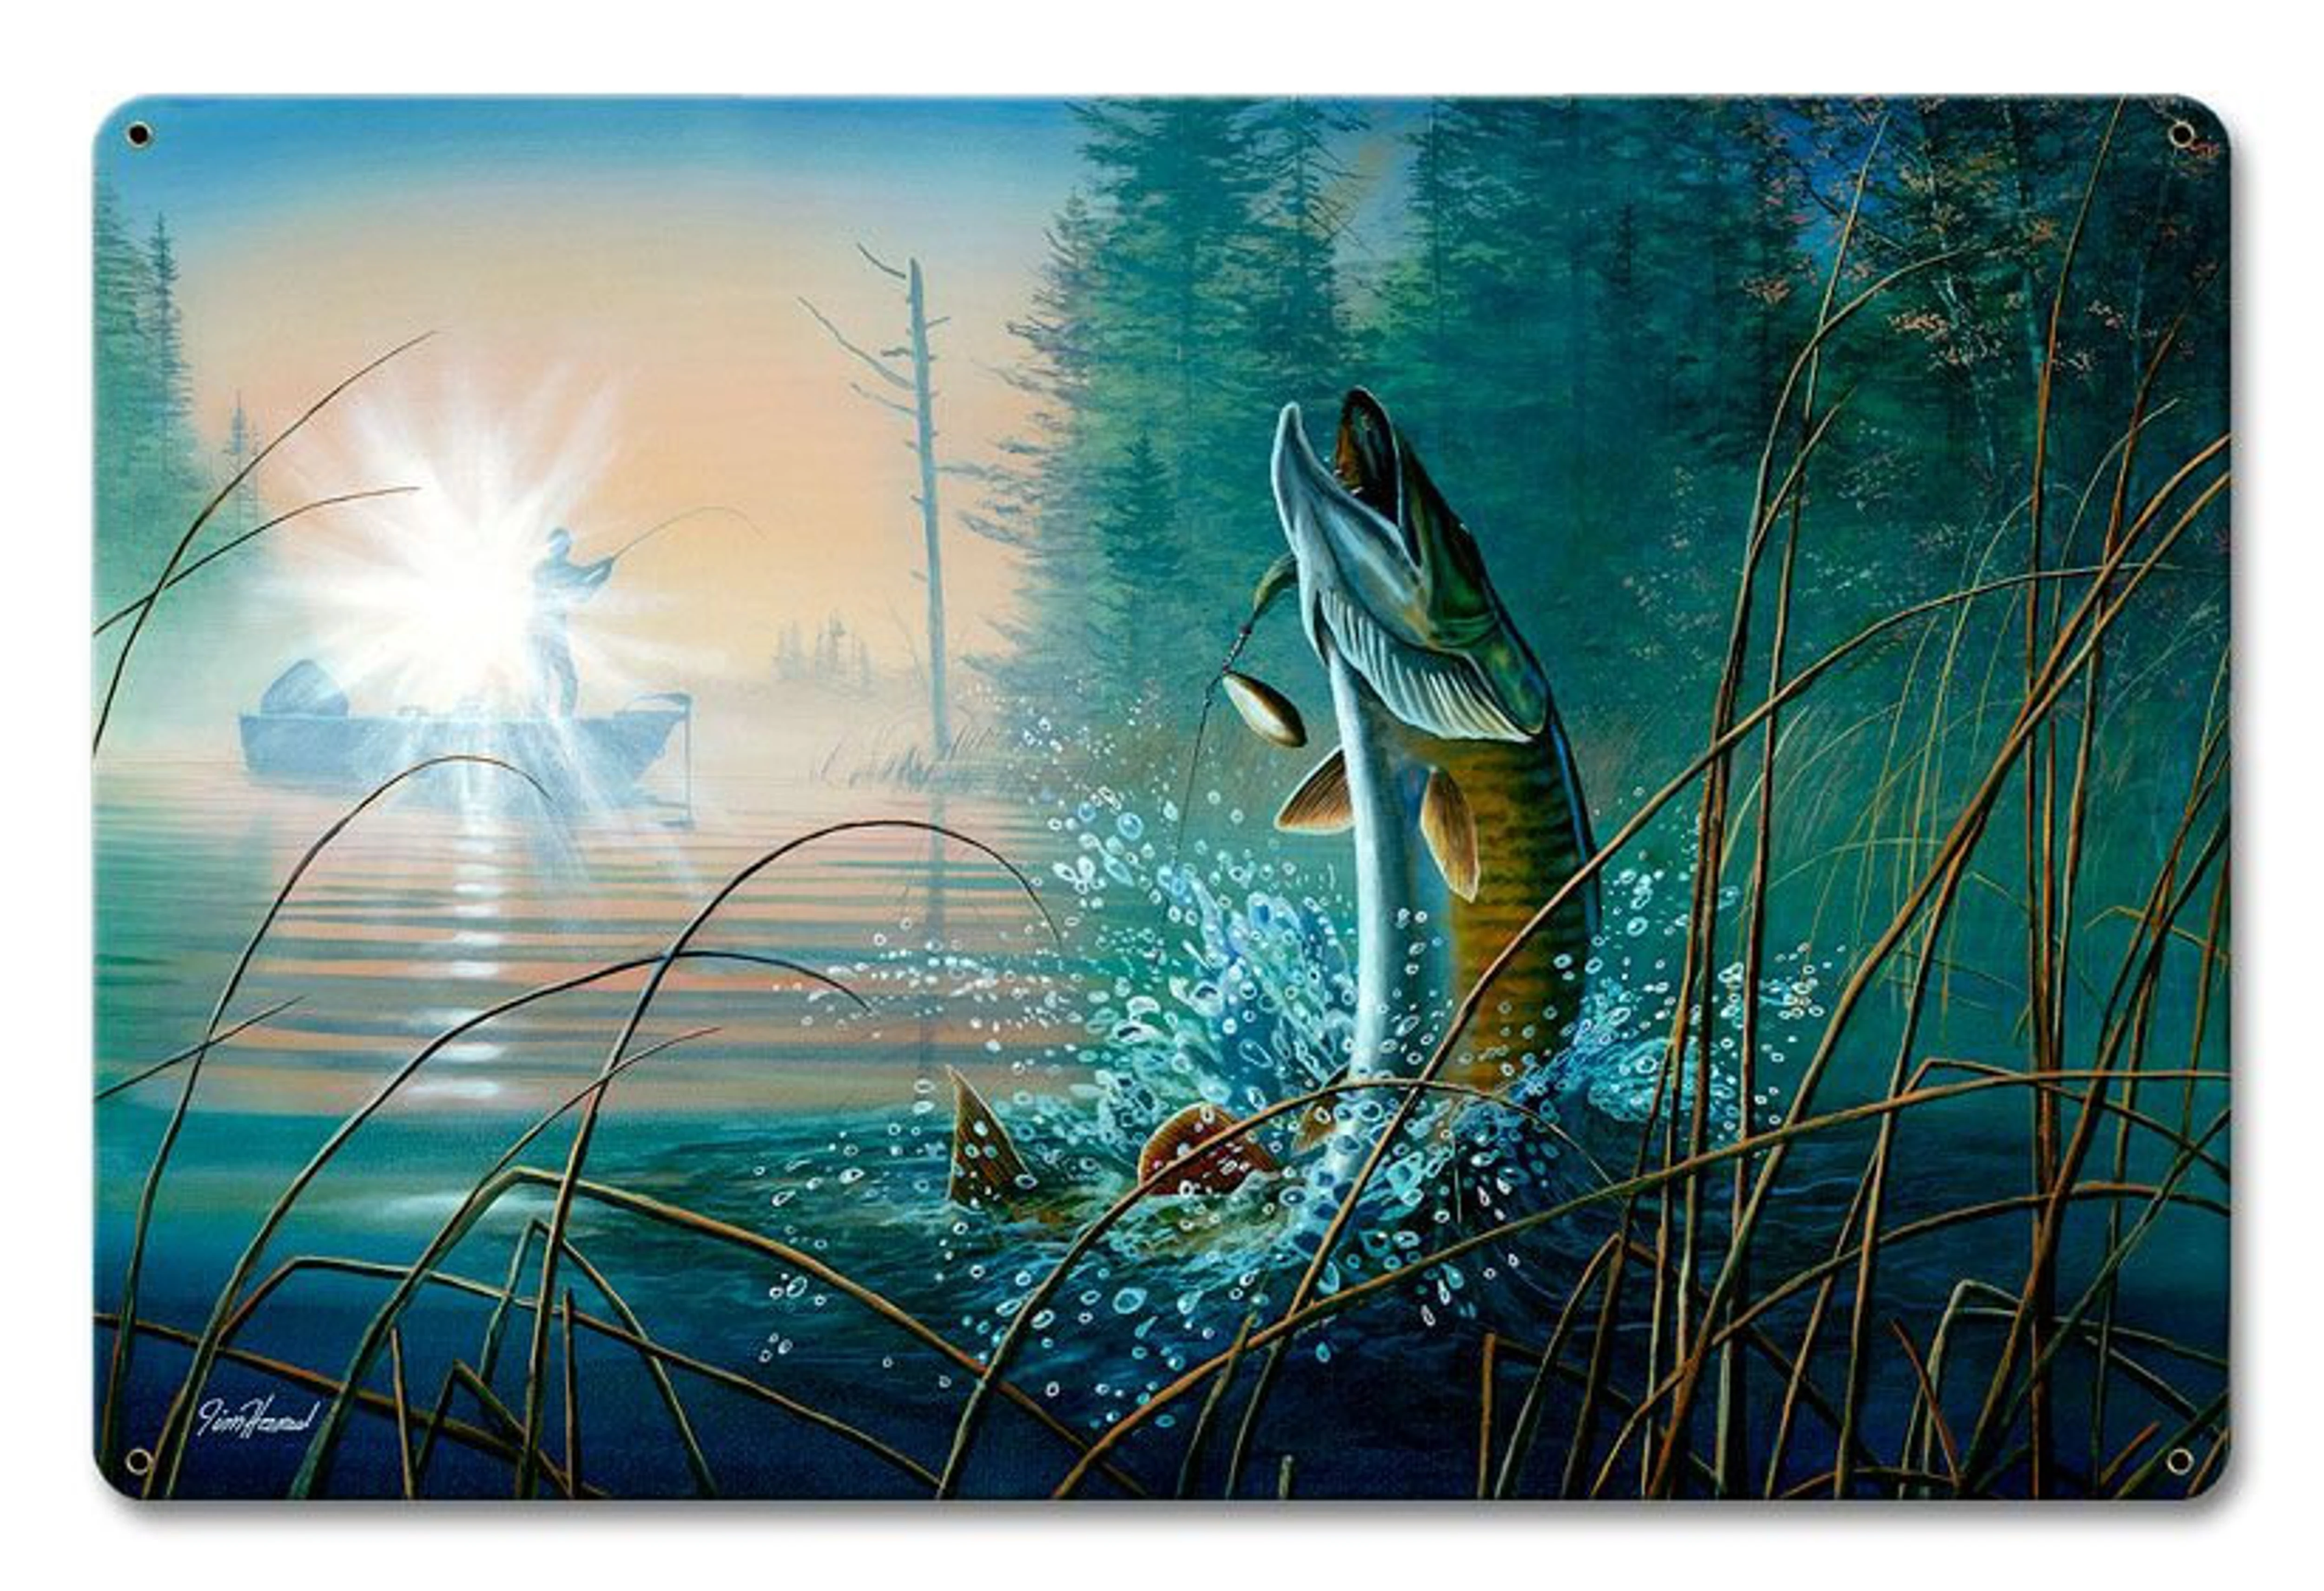 Waking The Giant Fishing by Jim Hansel Satin Finish Art on Metal Cabin Lodge Country home decor wall art PS